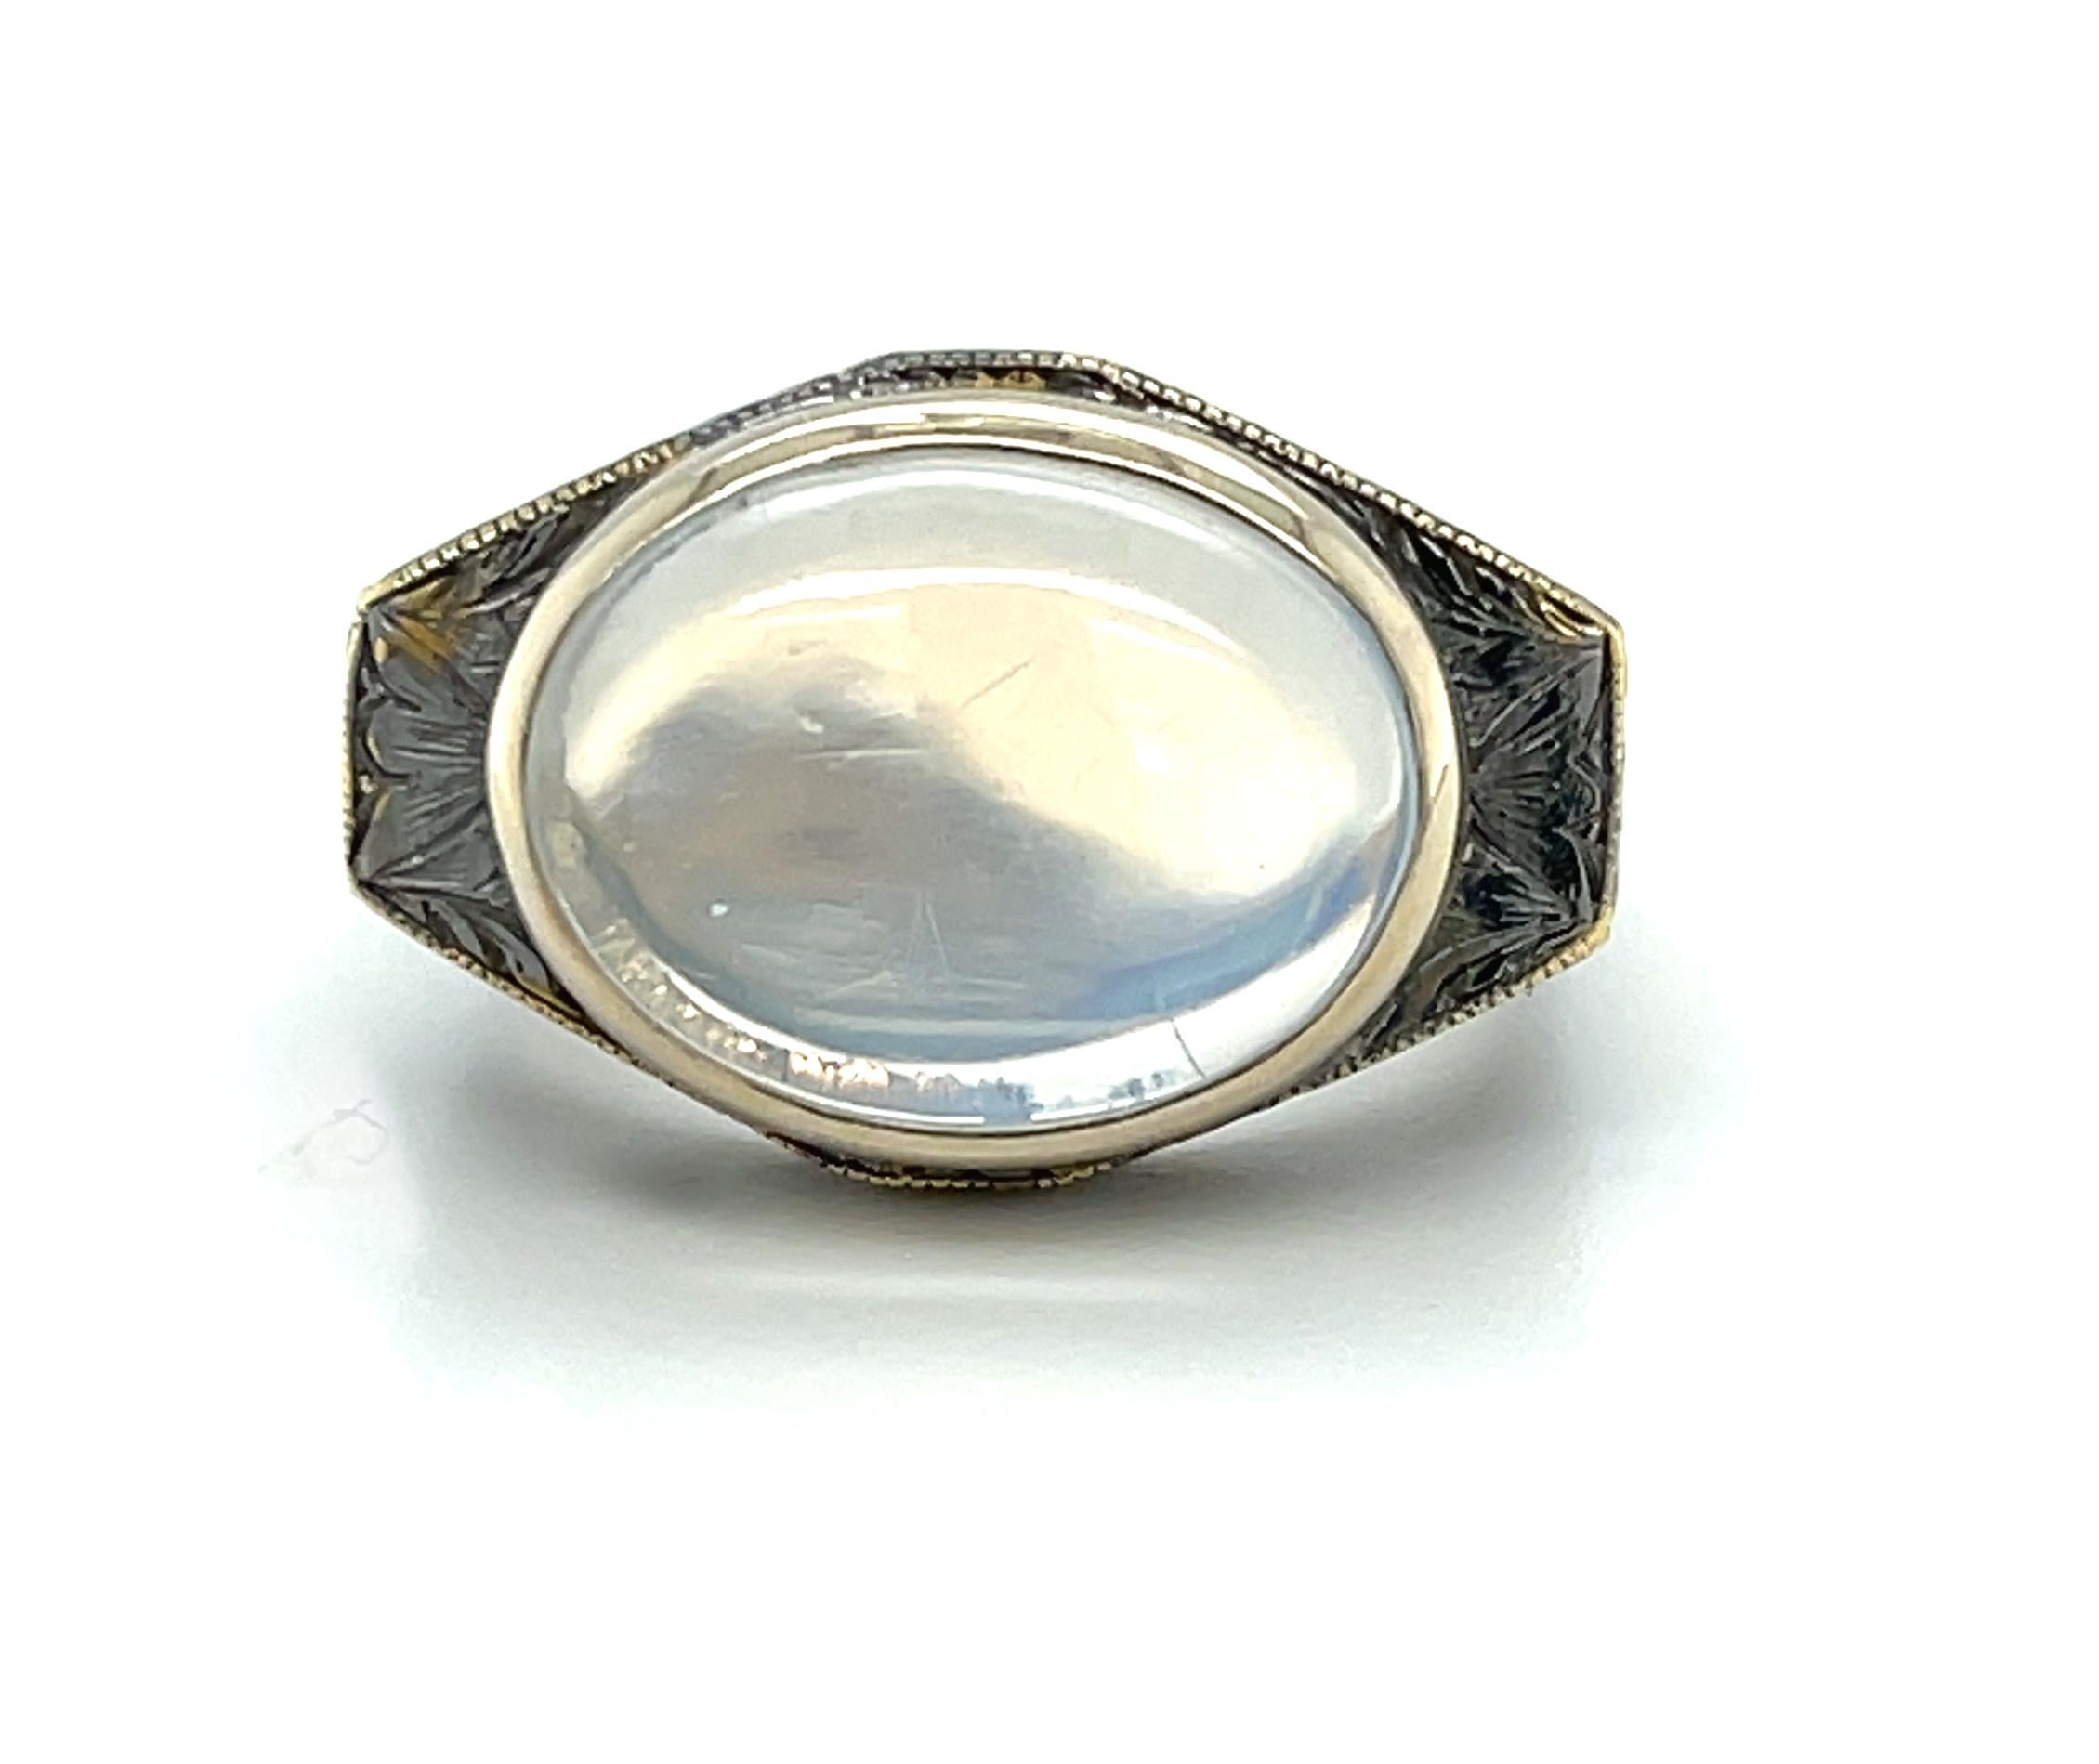 Only once in a blue moon will you see a moonstone of this size with both superior clarity and an elegant, mysterious blue sheen. This 6.11 carat moonstone is completely transparent with a strong blue-white 